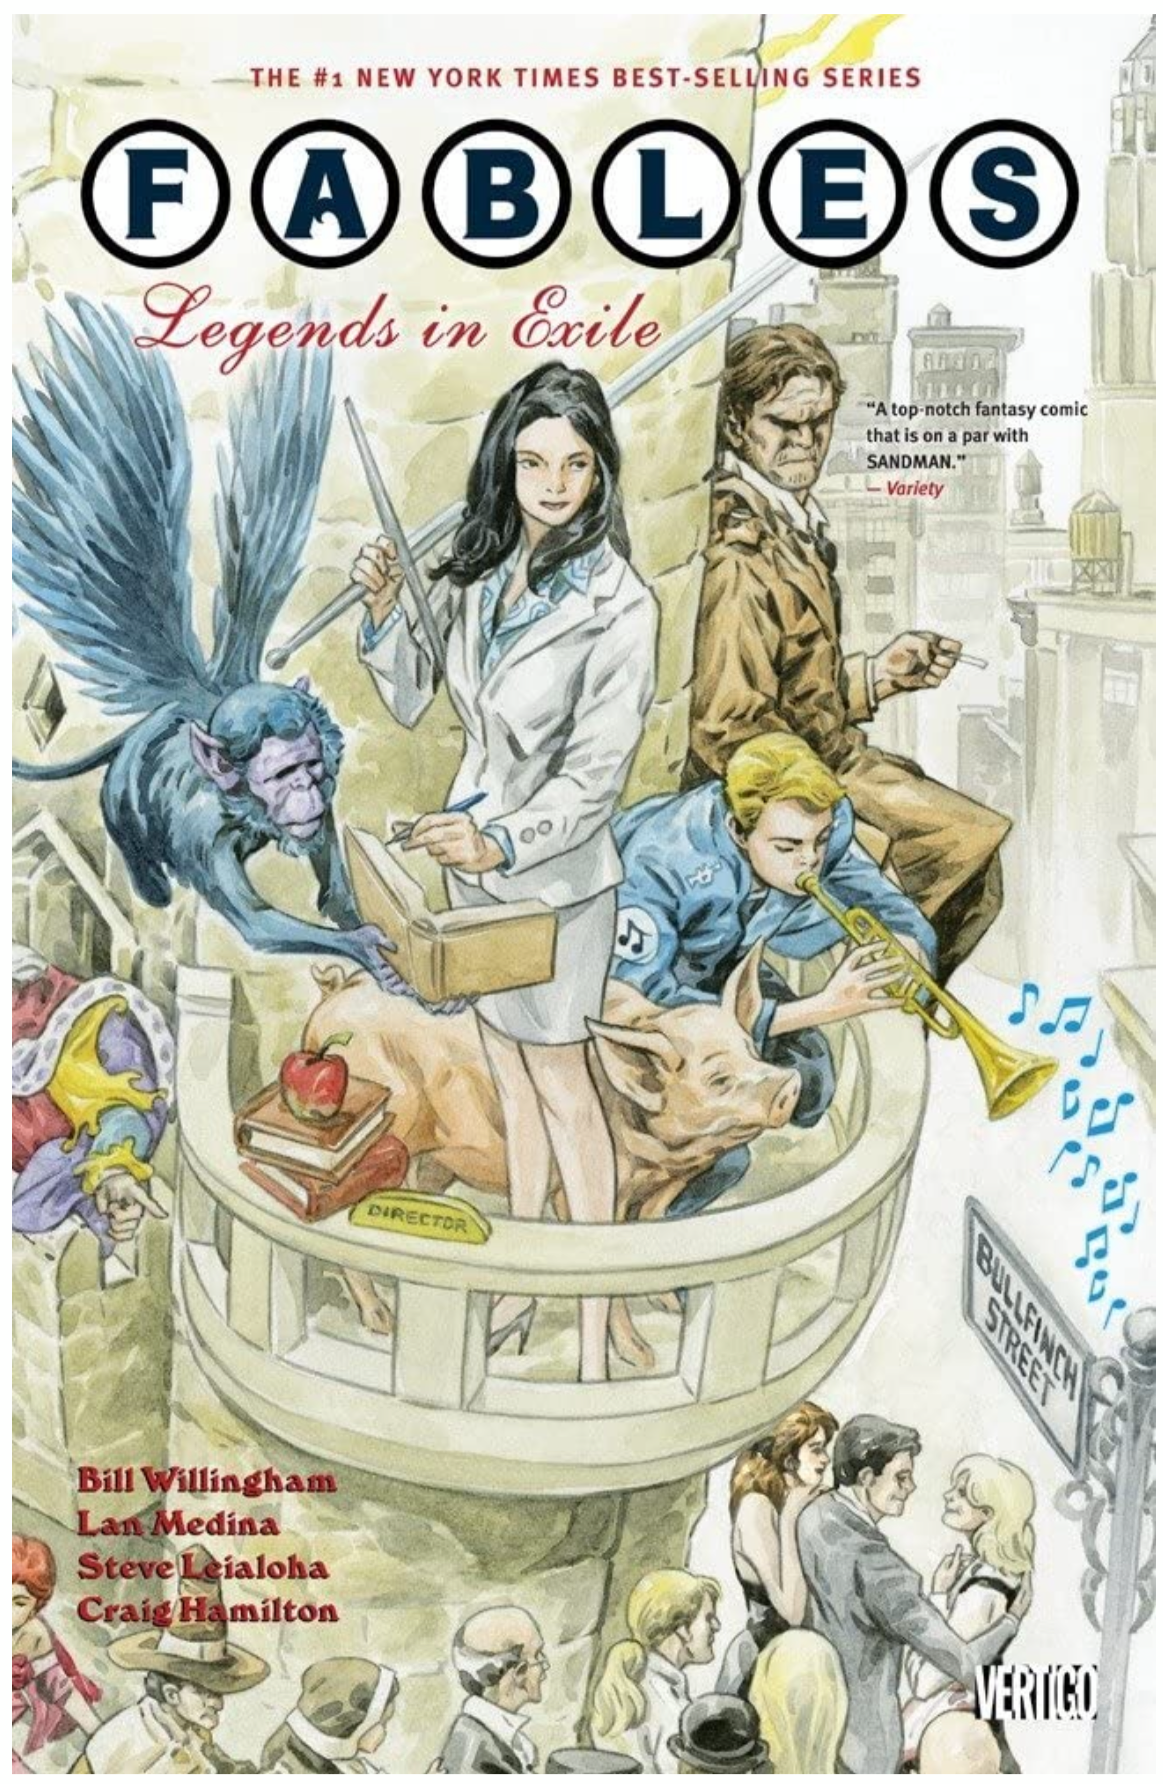 Fables Vol 1 Legends in Exile